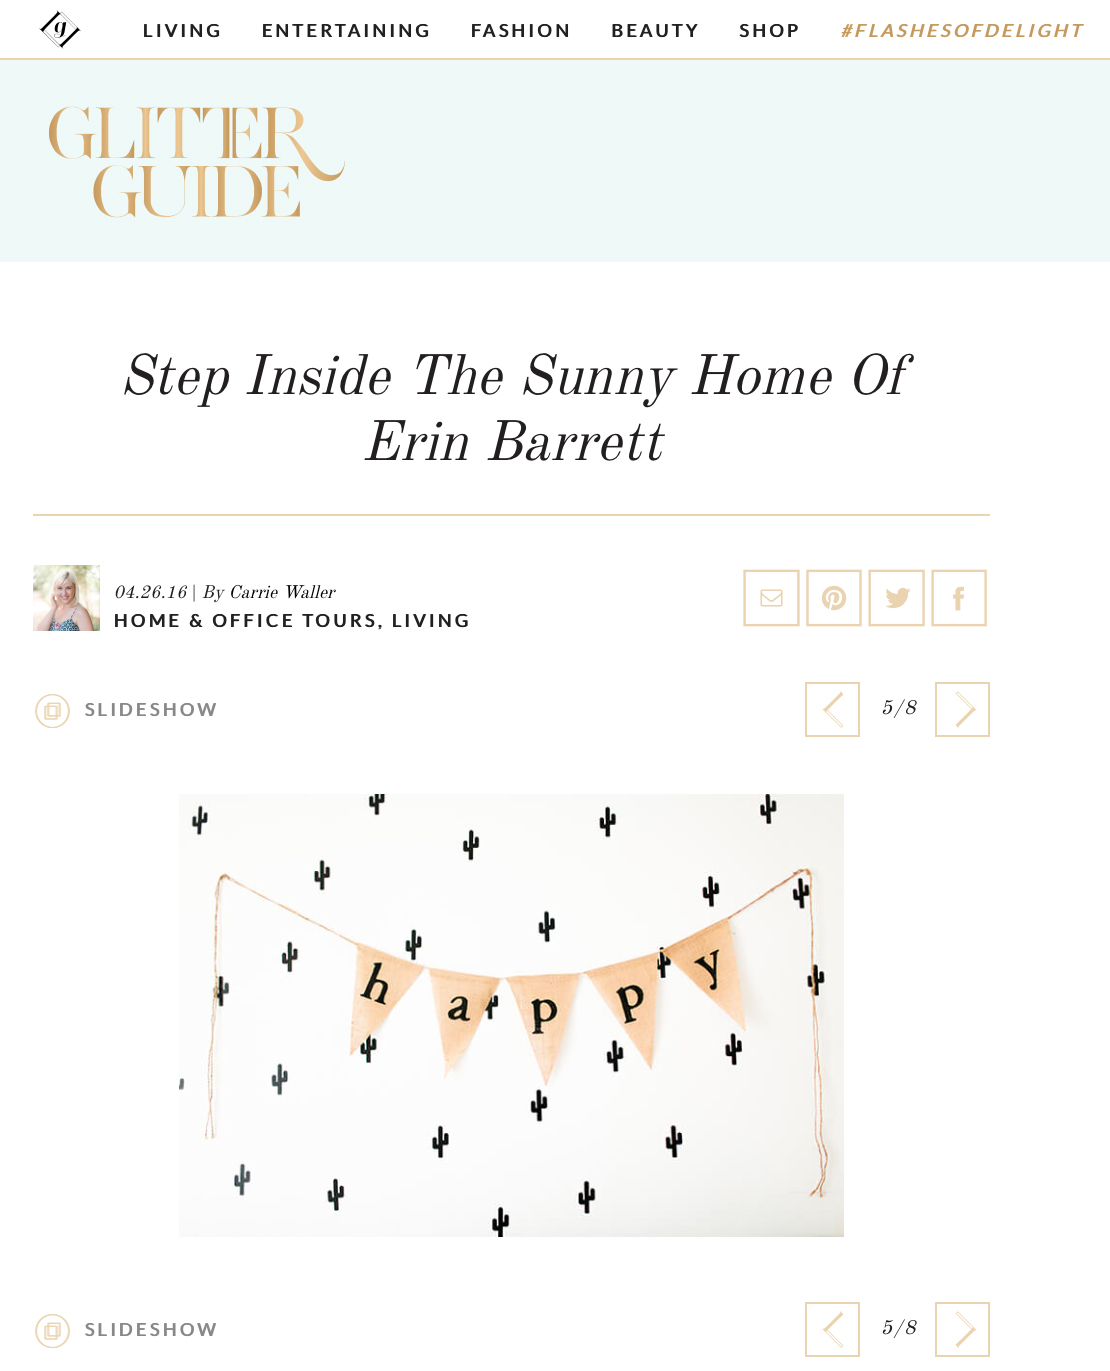 Rachel Red Photography Featured in Glitter Guide | Erin Barrett's Home